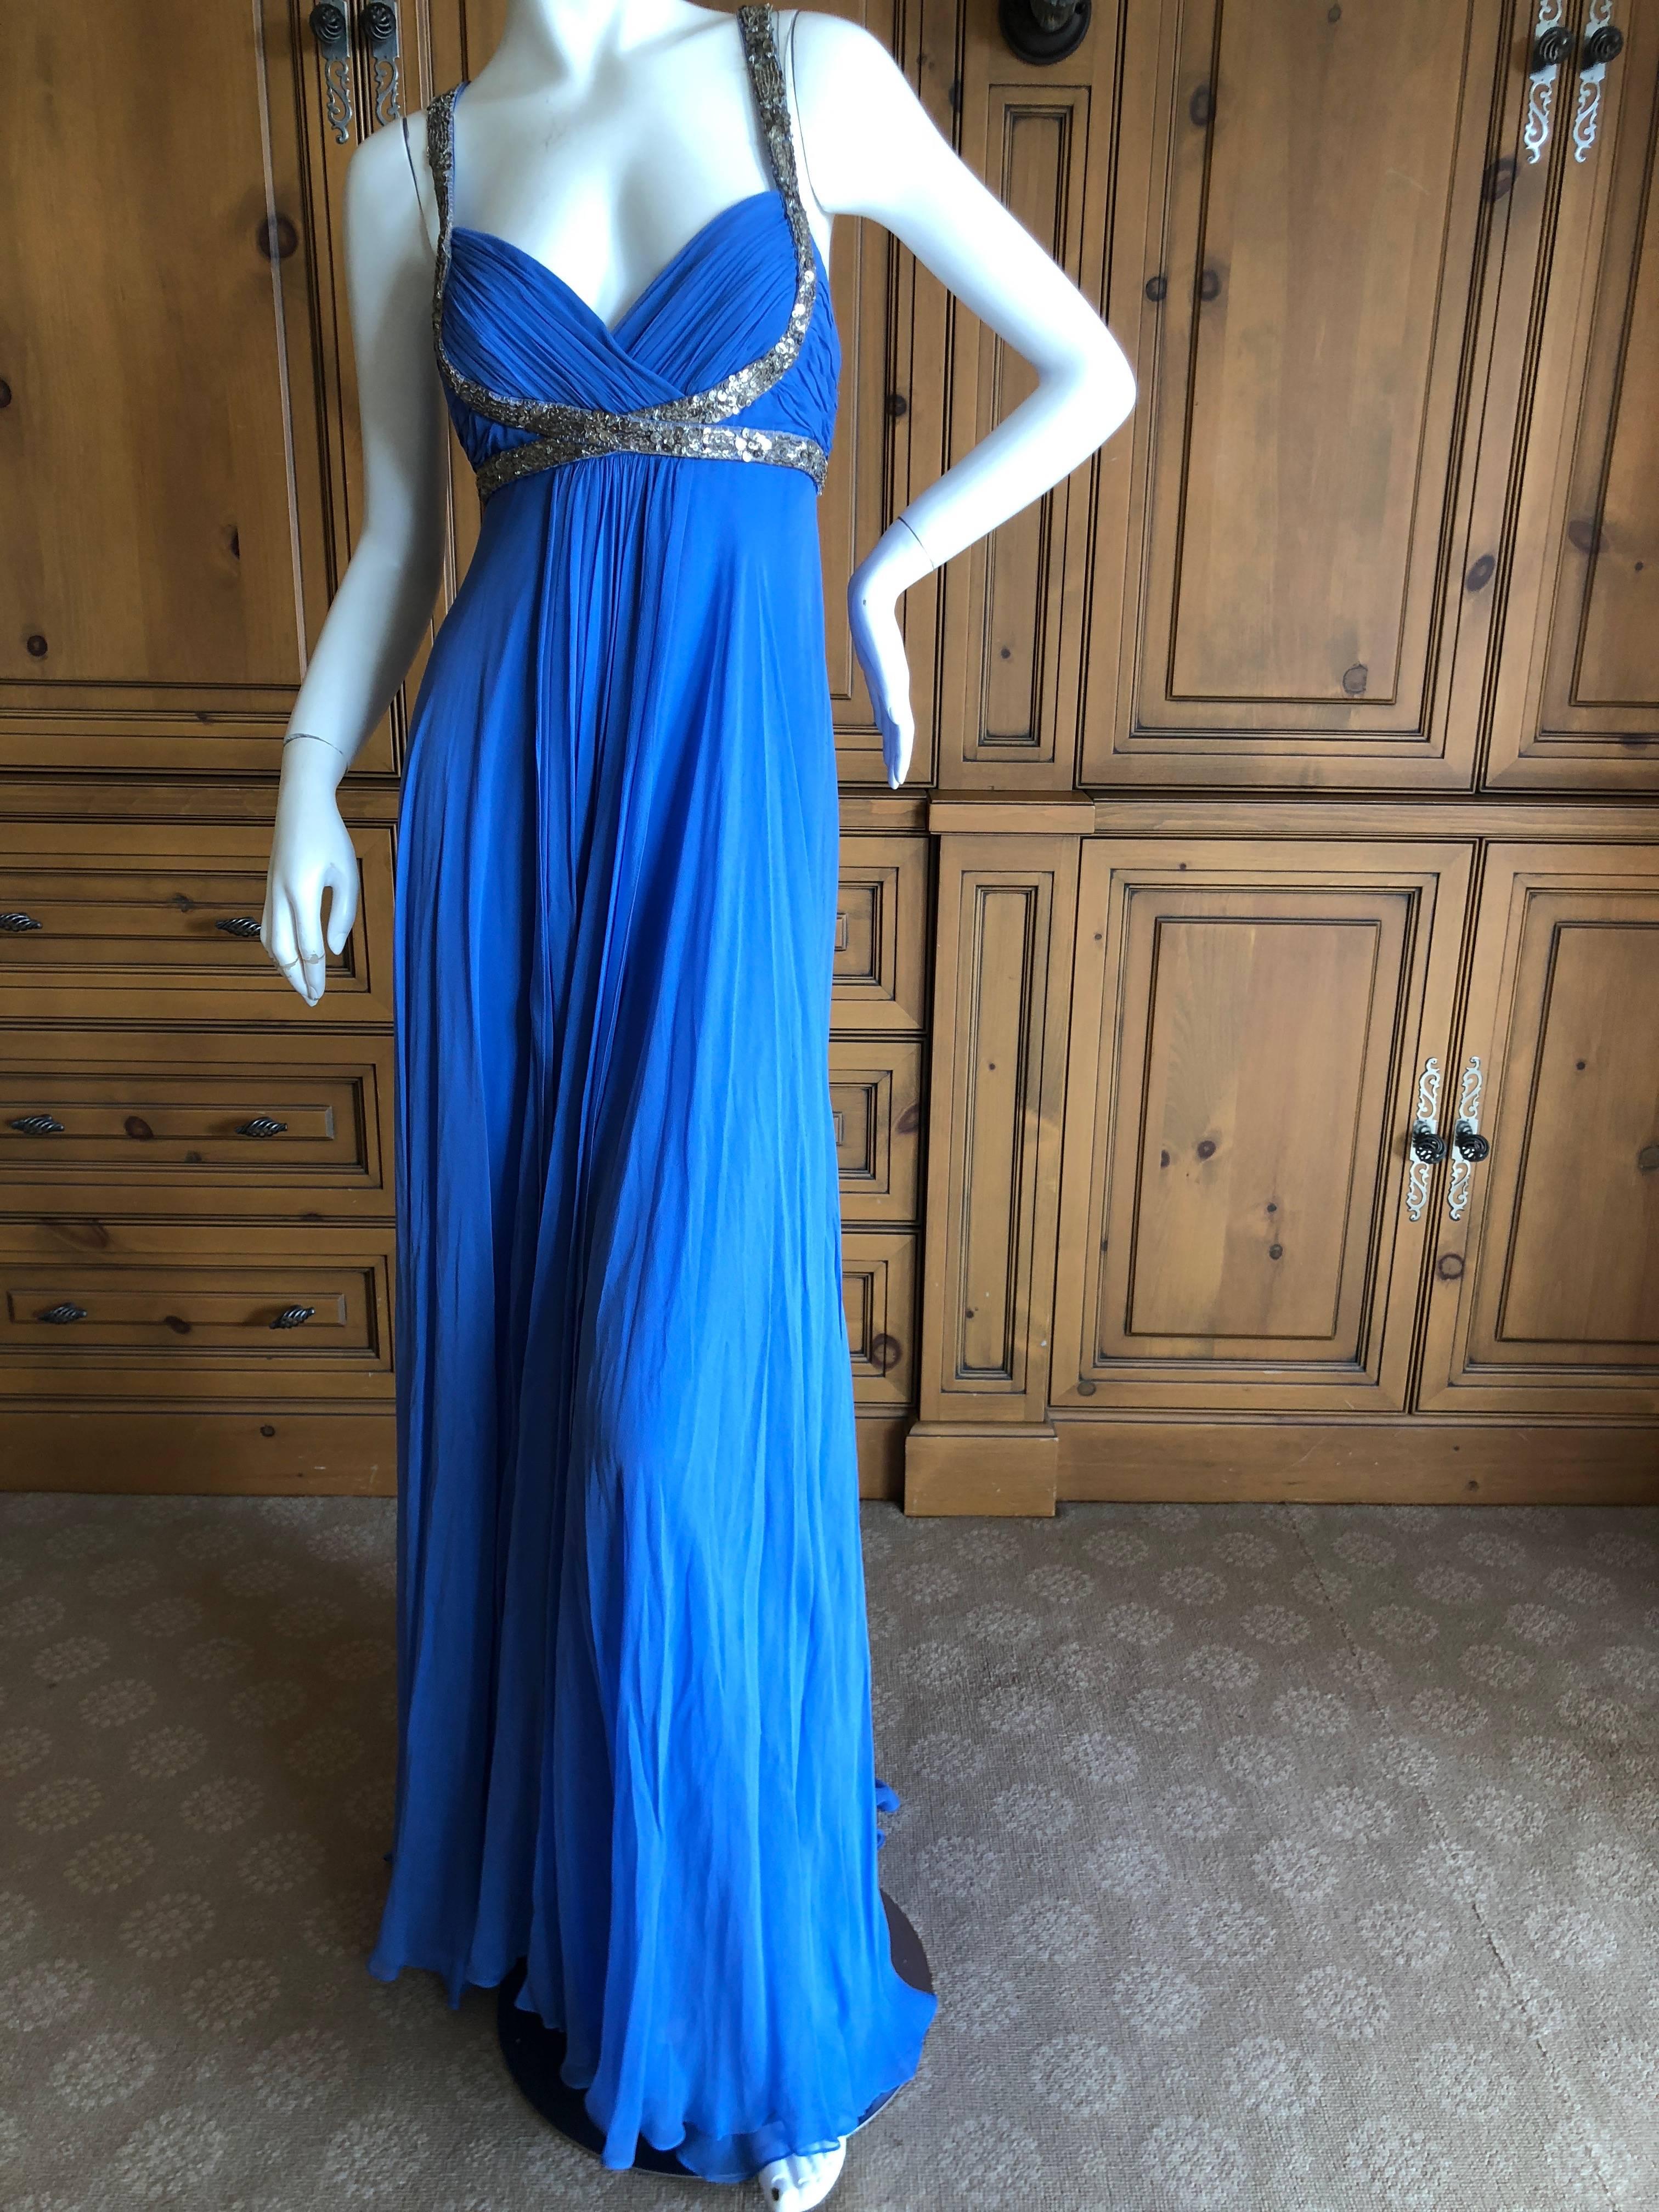 Marchesa Notte Silver Sequin Accented Blue Grecian Gown.
This is so pretty, from Marchesa Notte's first collection.
Size 10
Bust  36